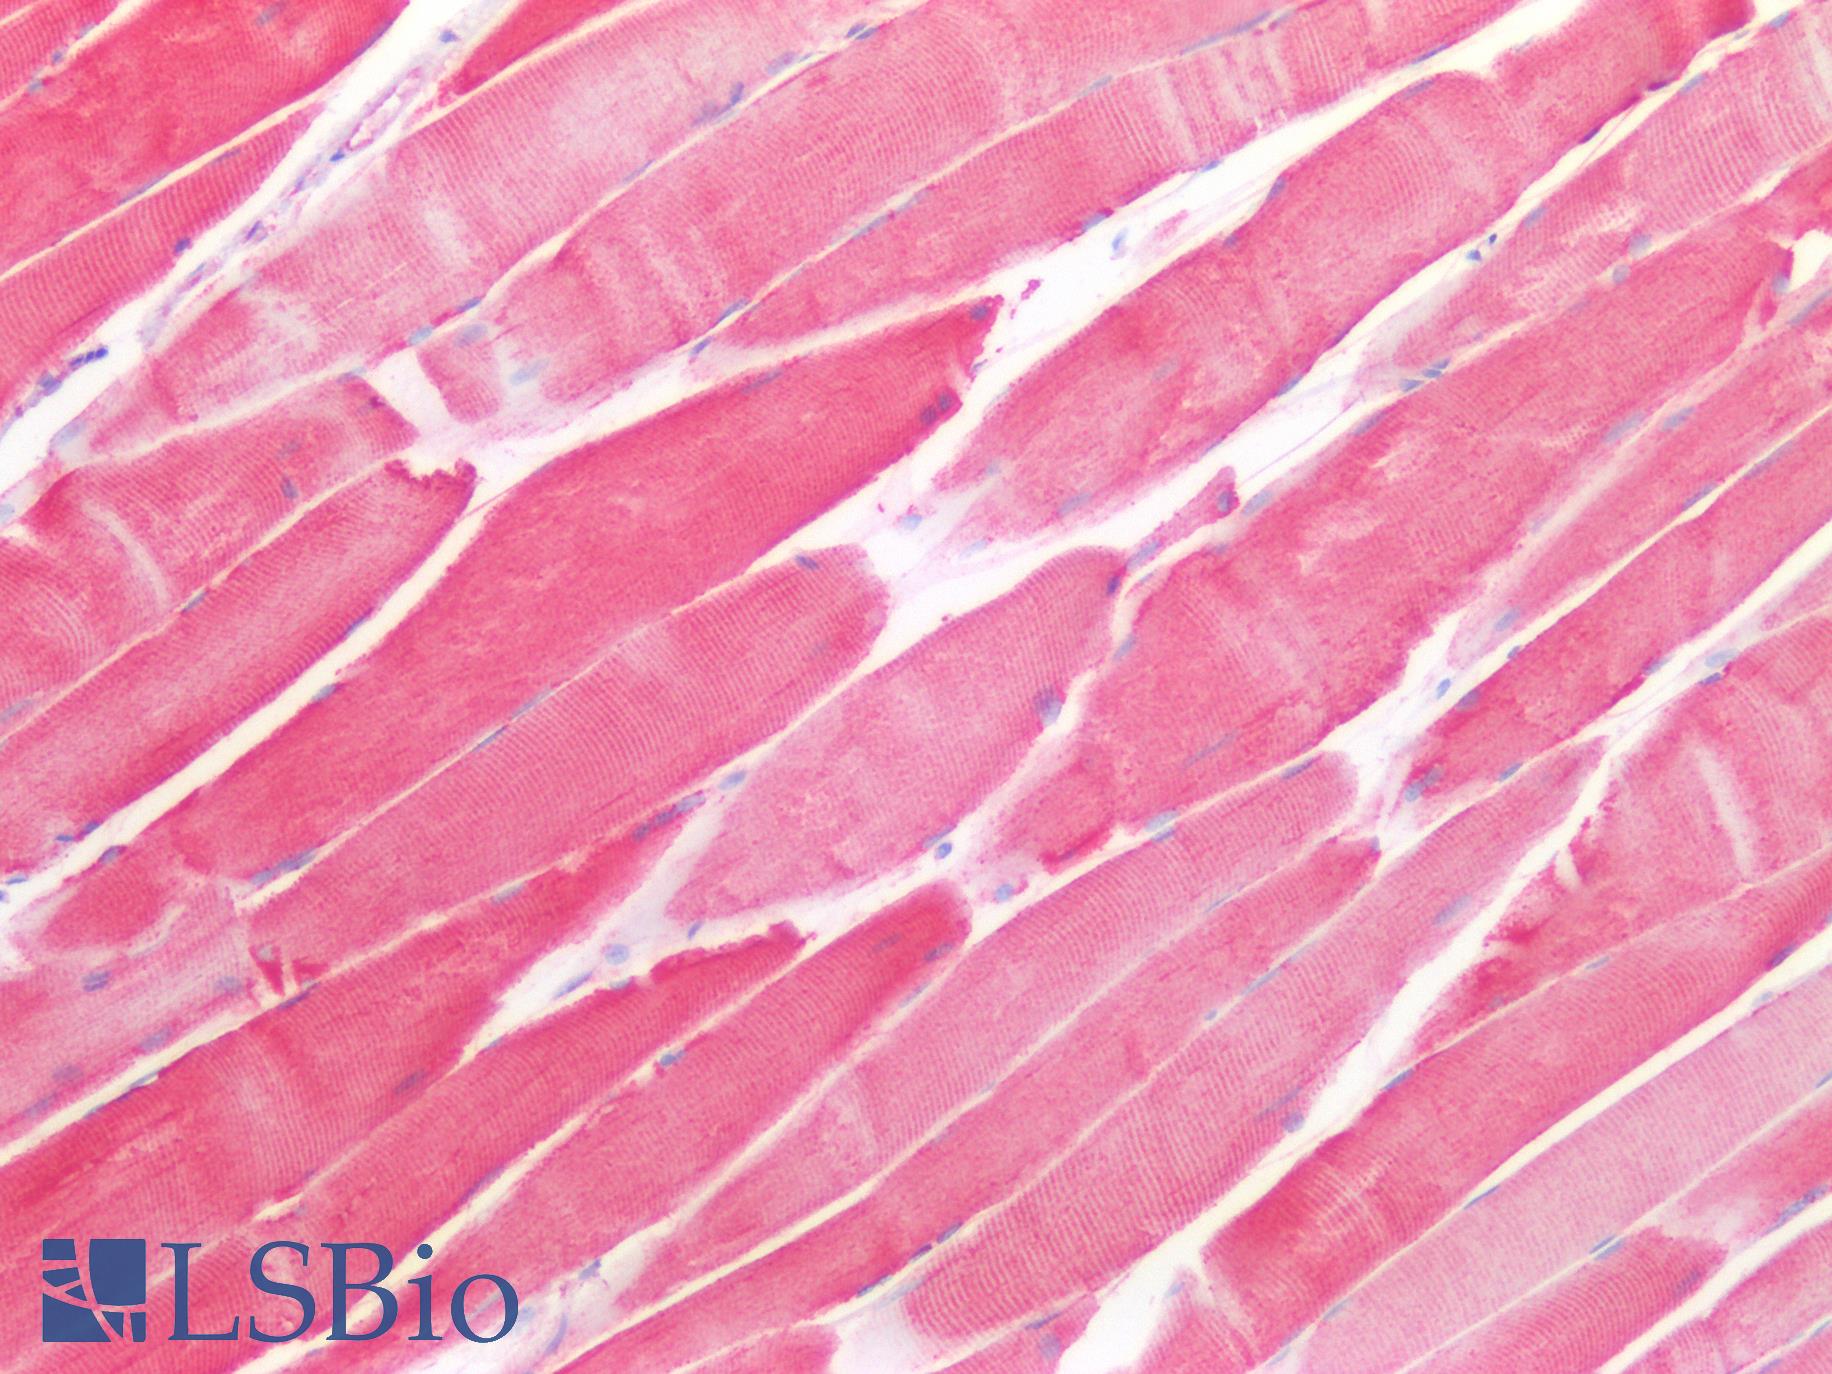 RRM2B / P53R2 Antibody - Human Skeletal Muscle: Formalin-Fixed, Paraffin-Embedded (FFPE)